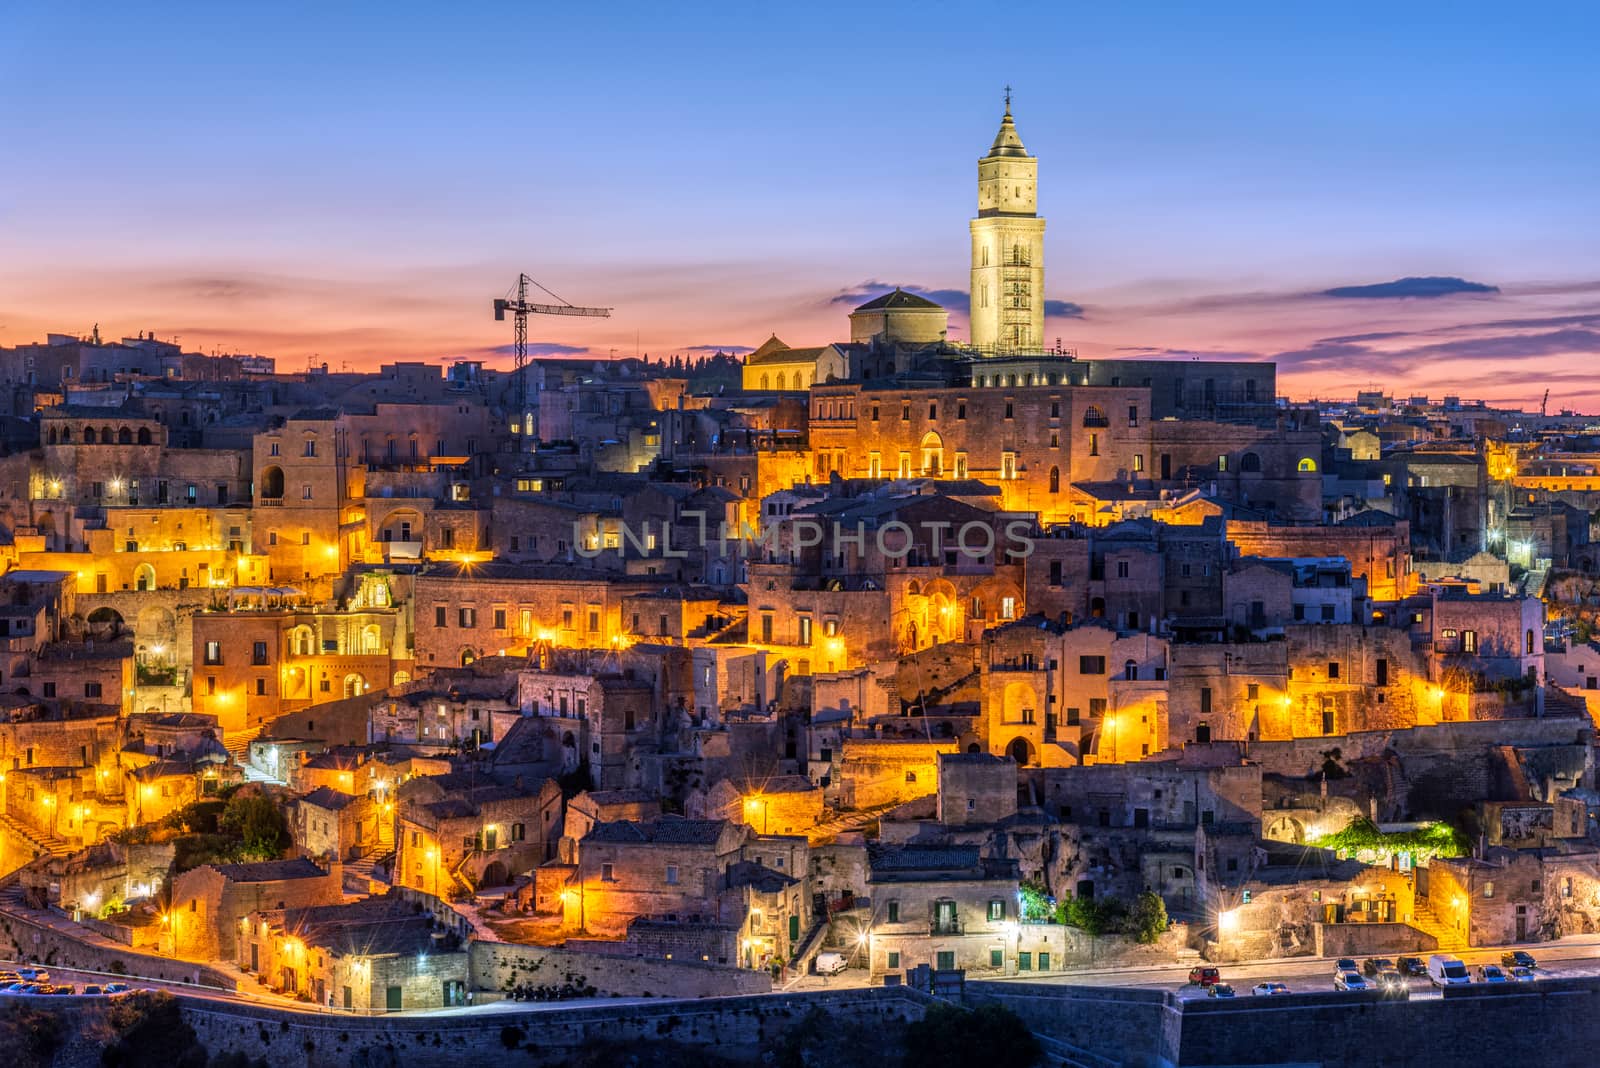 The old town of Matera by elxeneize